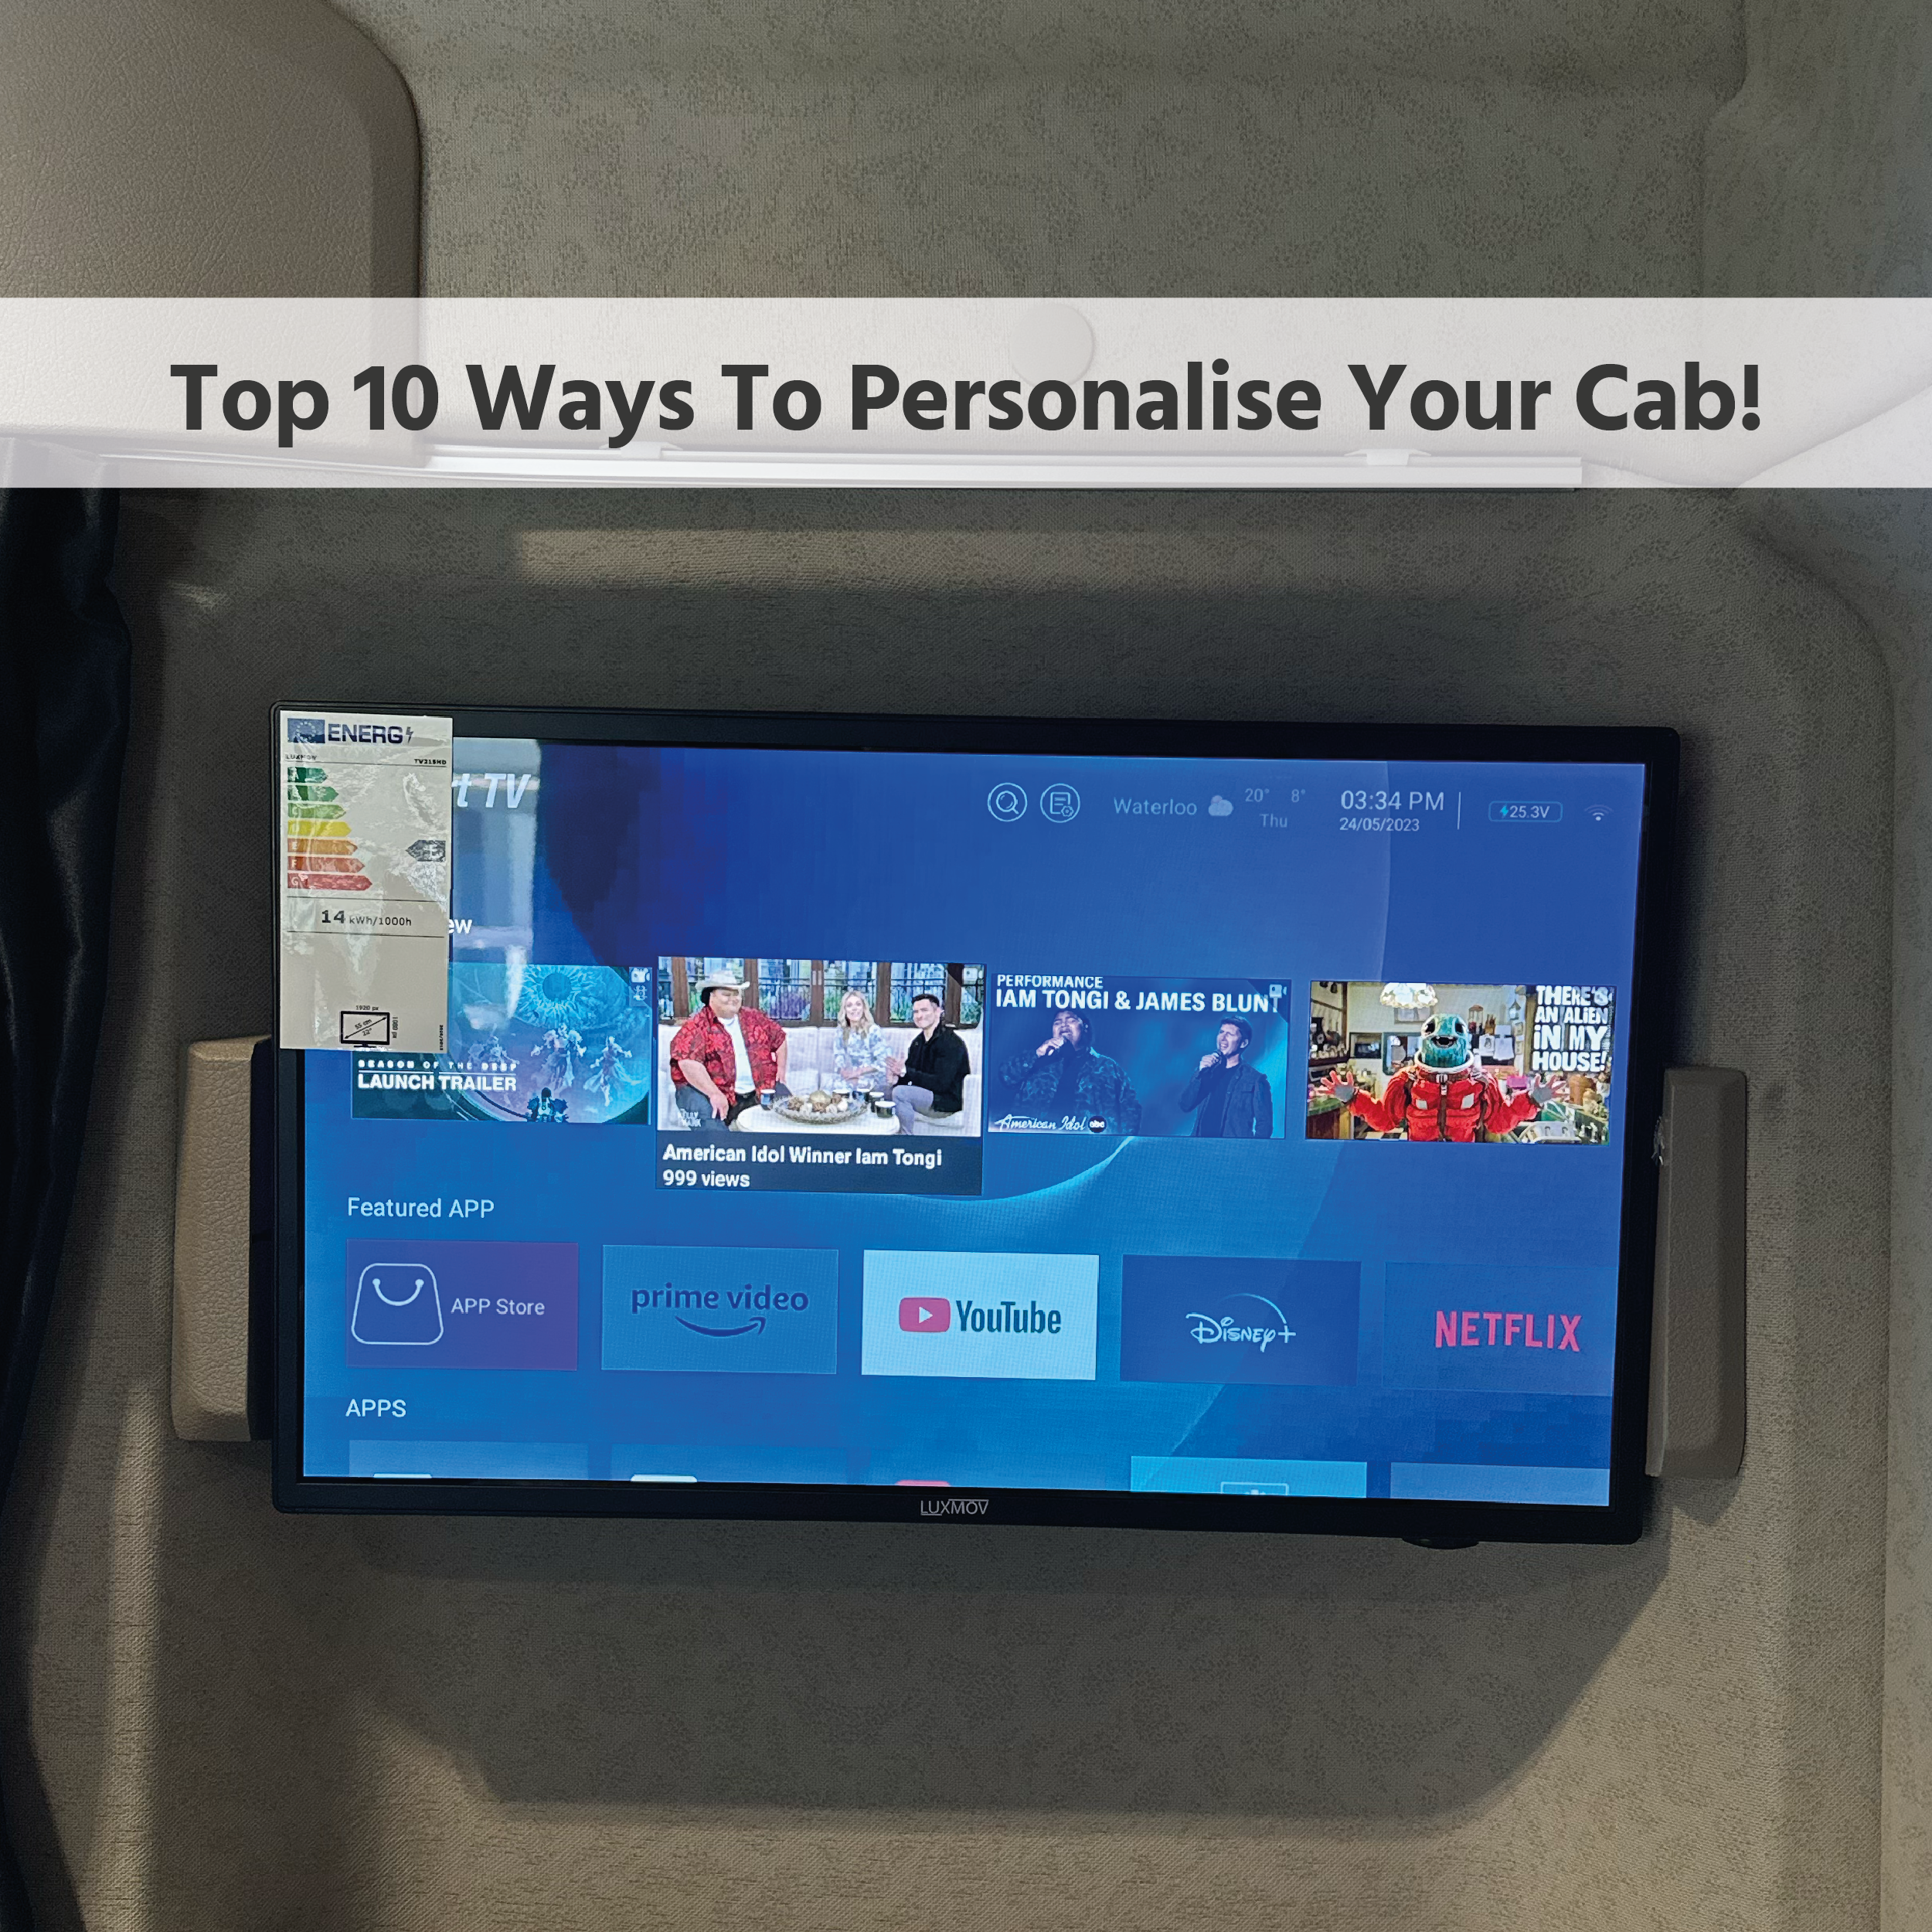 Image of Top 10 Ways To Personalise Your Cab!